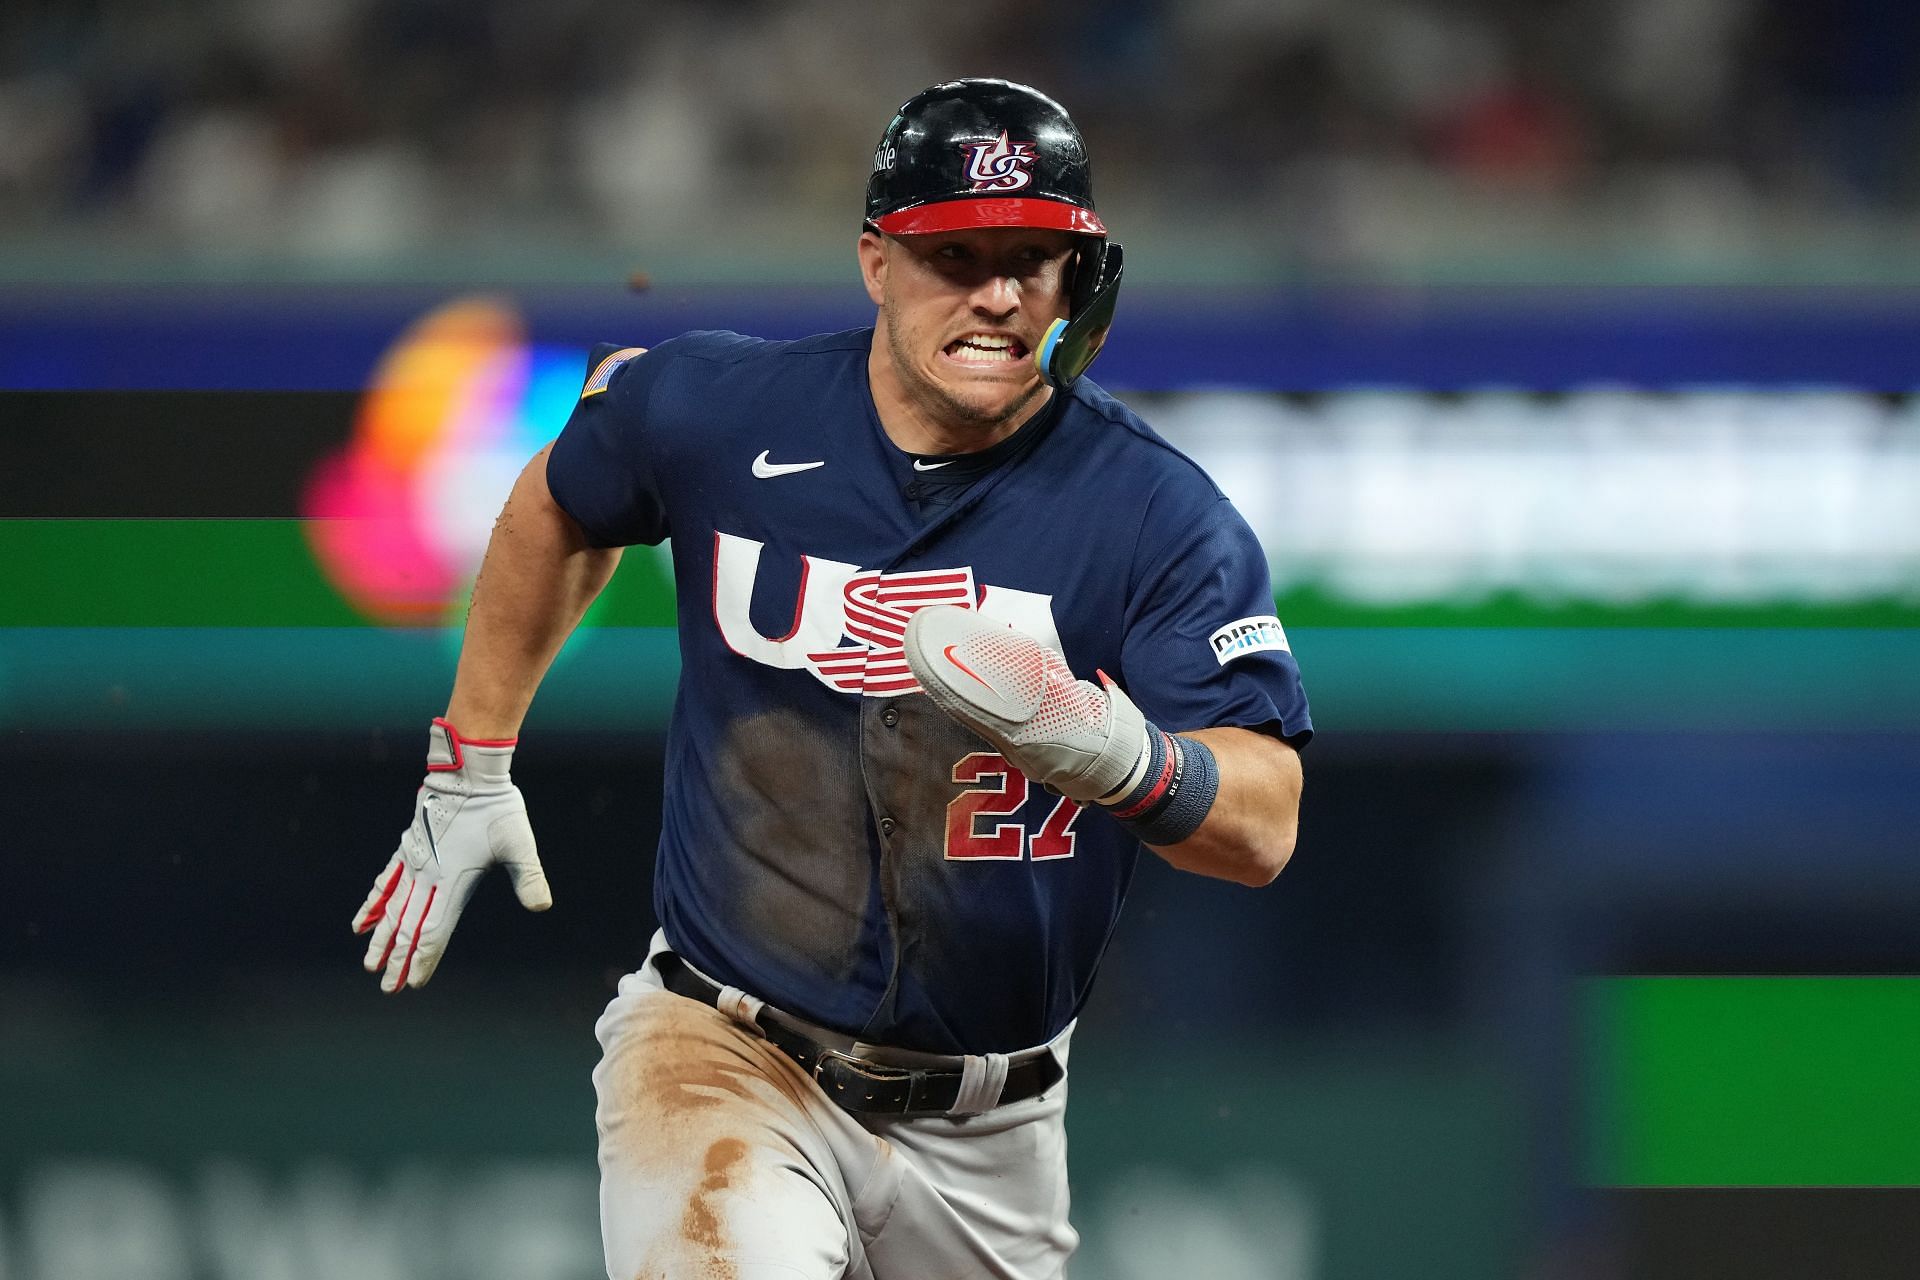 Trout leads US in WBC at apex of stellar baseball career